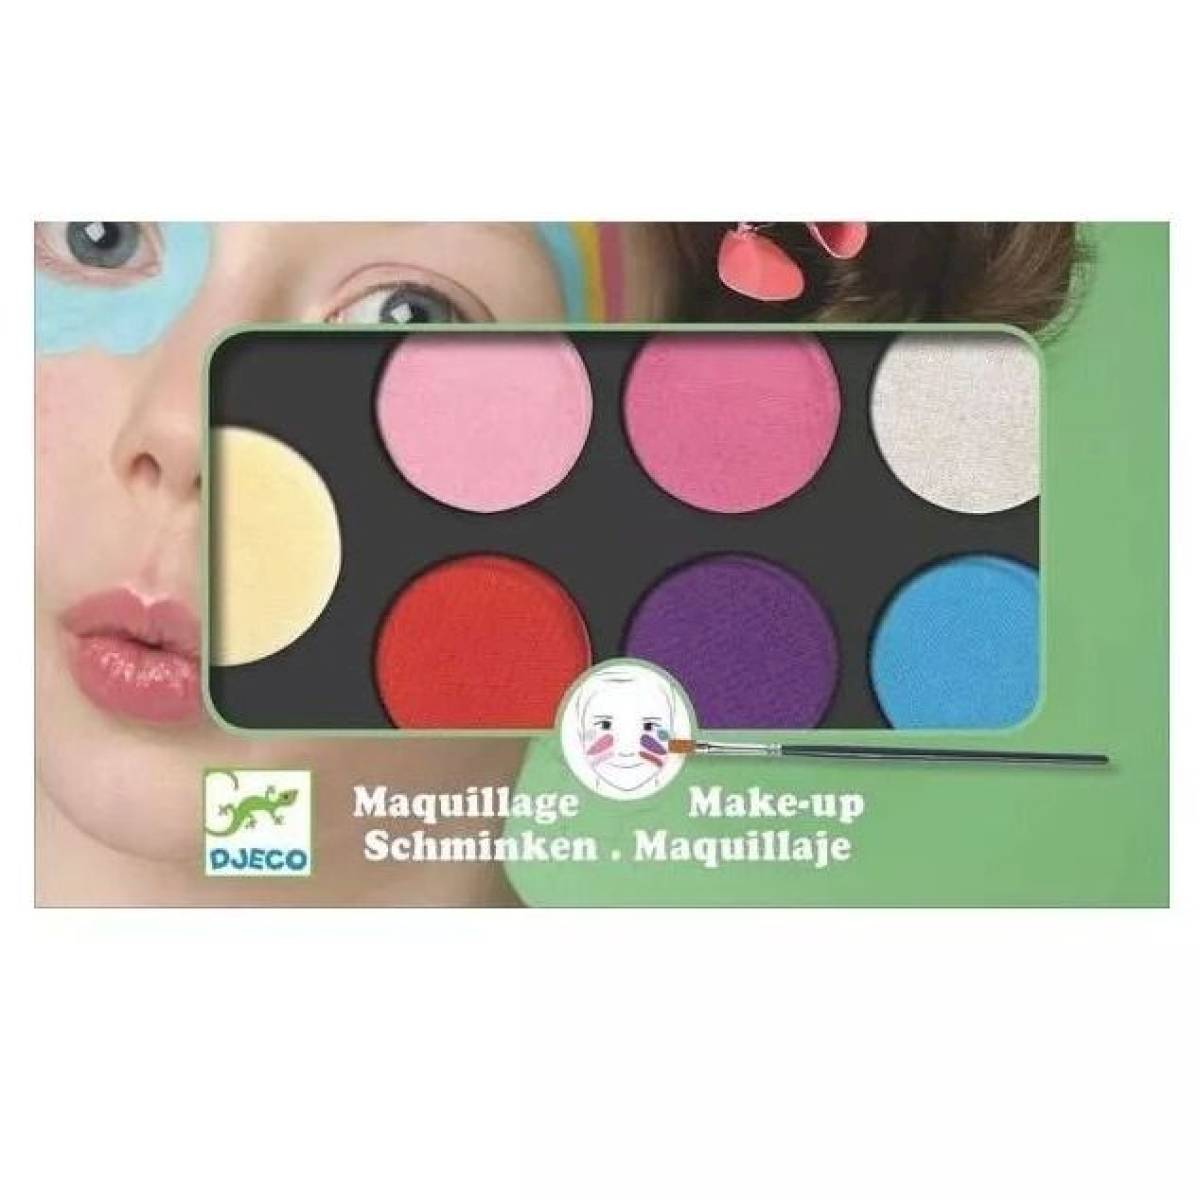 Maquillage Palette 6 couleurs Sweet - Djeco